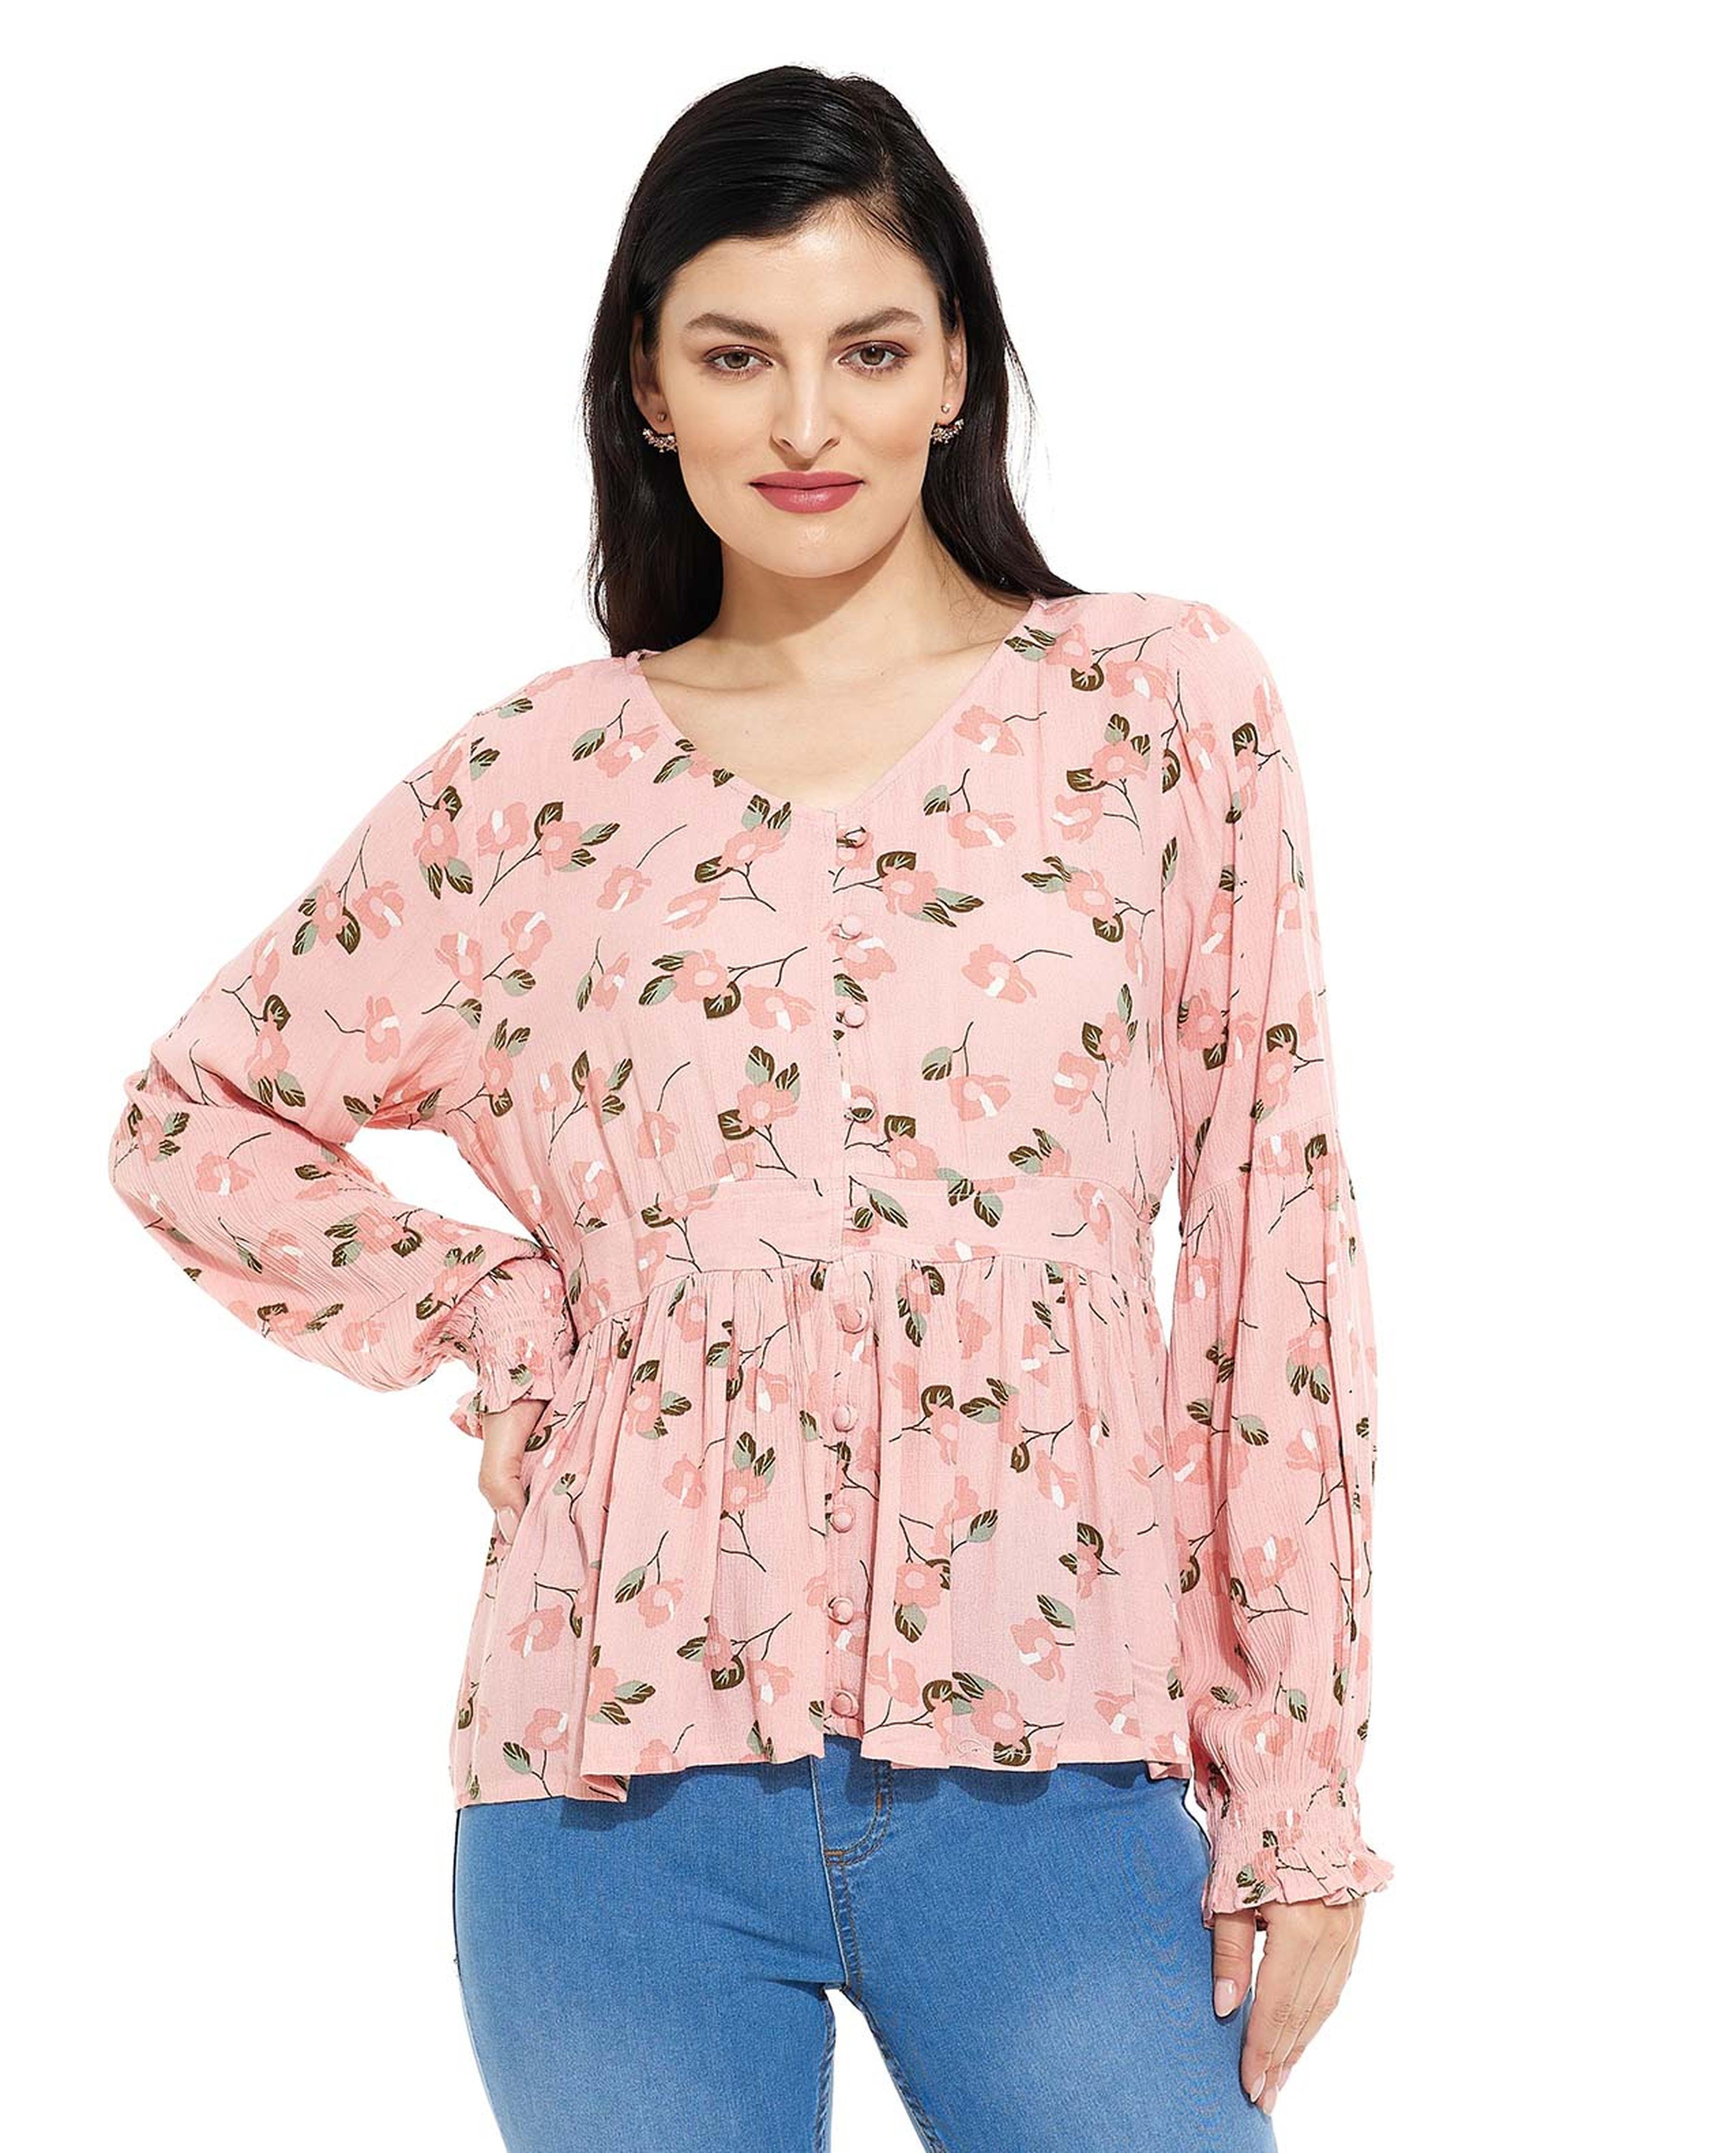 Floral Printed Top with V-Neck and Long Sleeves